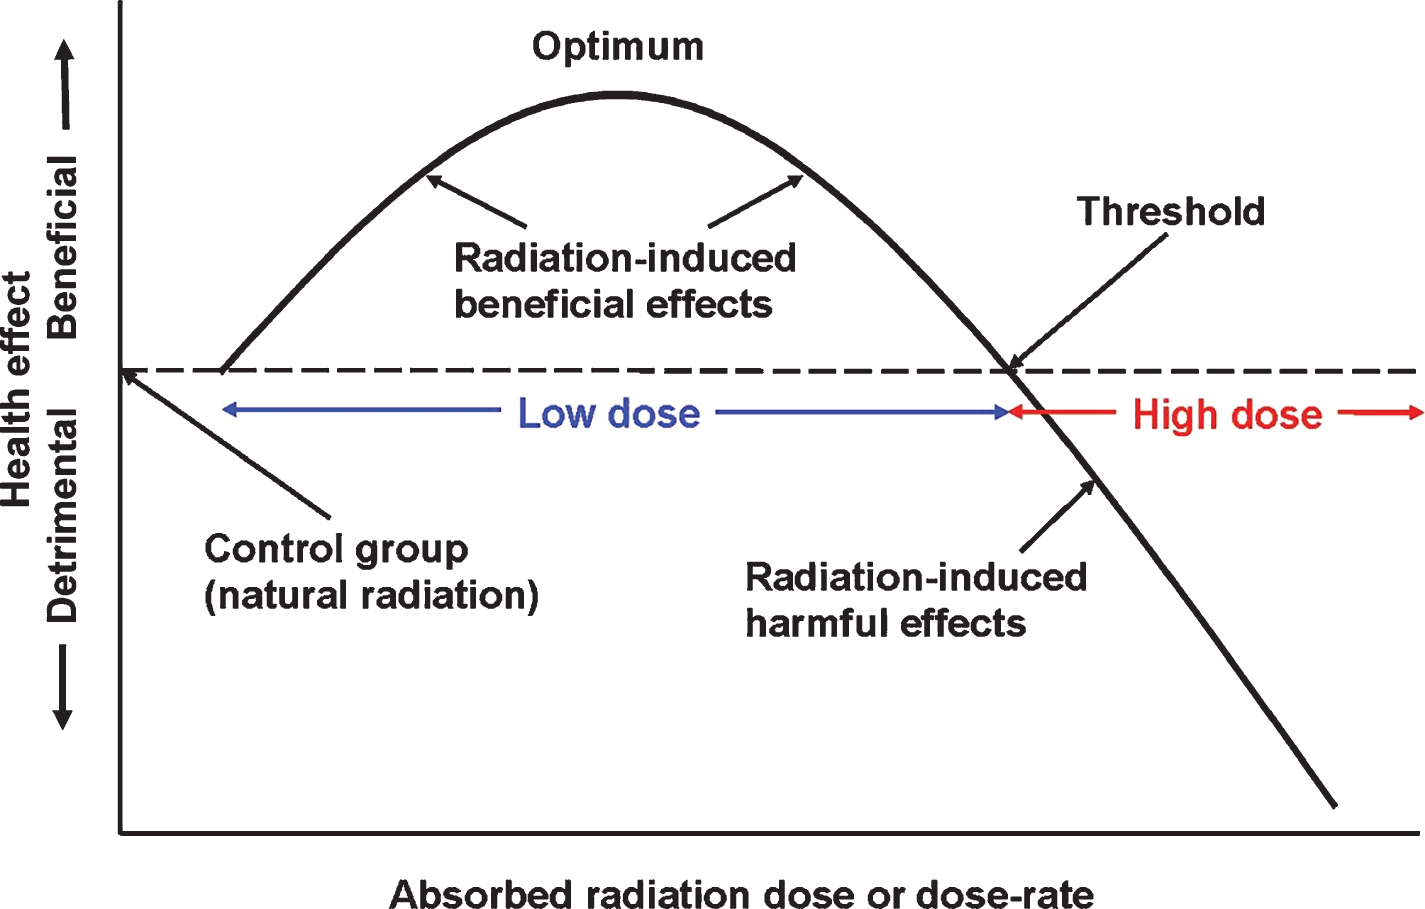 The biphasic dose-response model and the definition of a low dose of radiation. Reprinted with permission from Cuttler JM [20], © 2020 SAGE Publications and adapted for this publication. Reference [35], Fig. 1 suggests that optimal radiation-induced stimulation of the protection systems occurs when the dose is between 0.1 to 0.5 Gy. The threshold for adverse effects due to an acute exposure (dose fraction) of the brain is about 3 Gy.